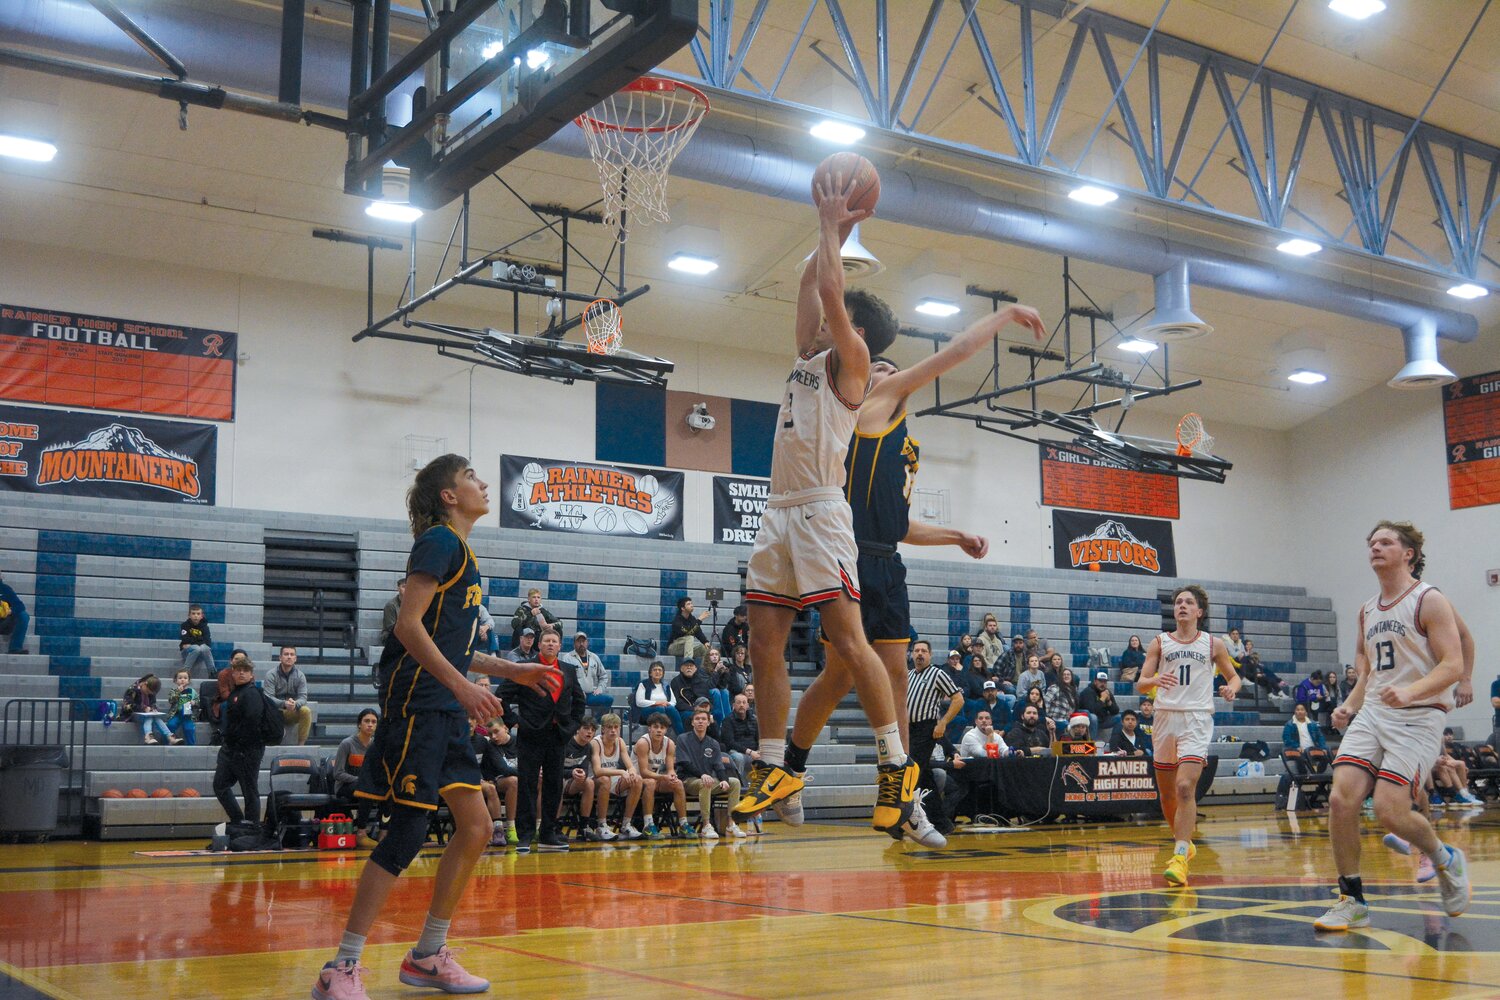 Joshua Meldrum (3) jumps for a layup against Forks on Dec. 2.